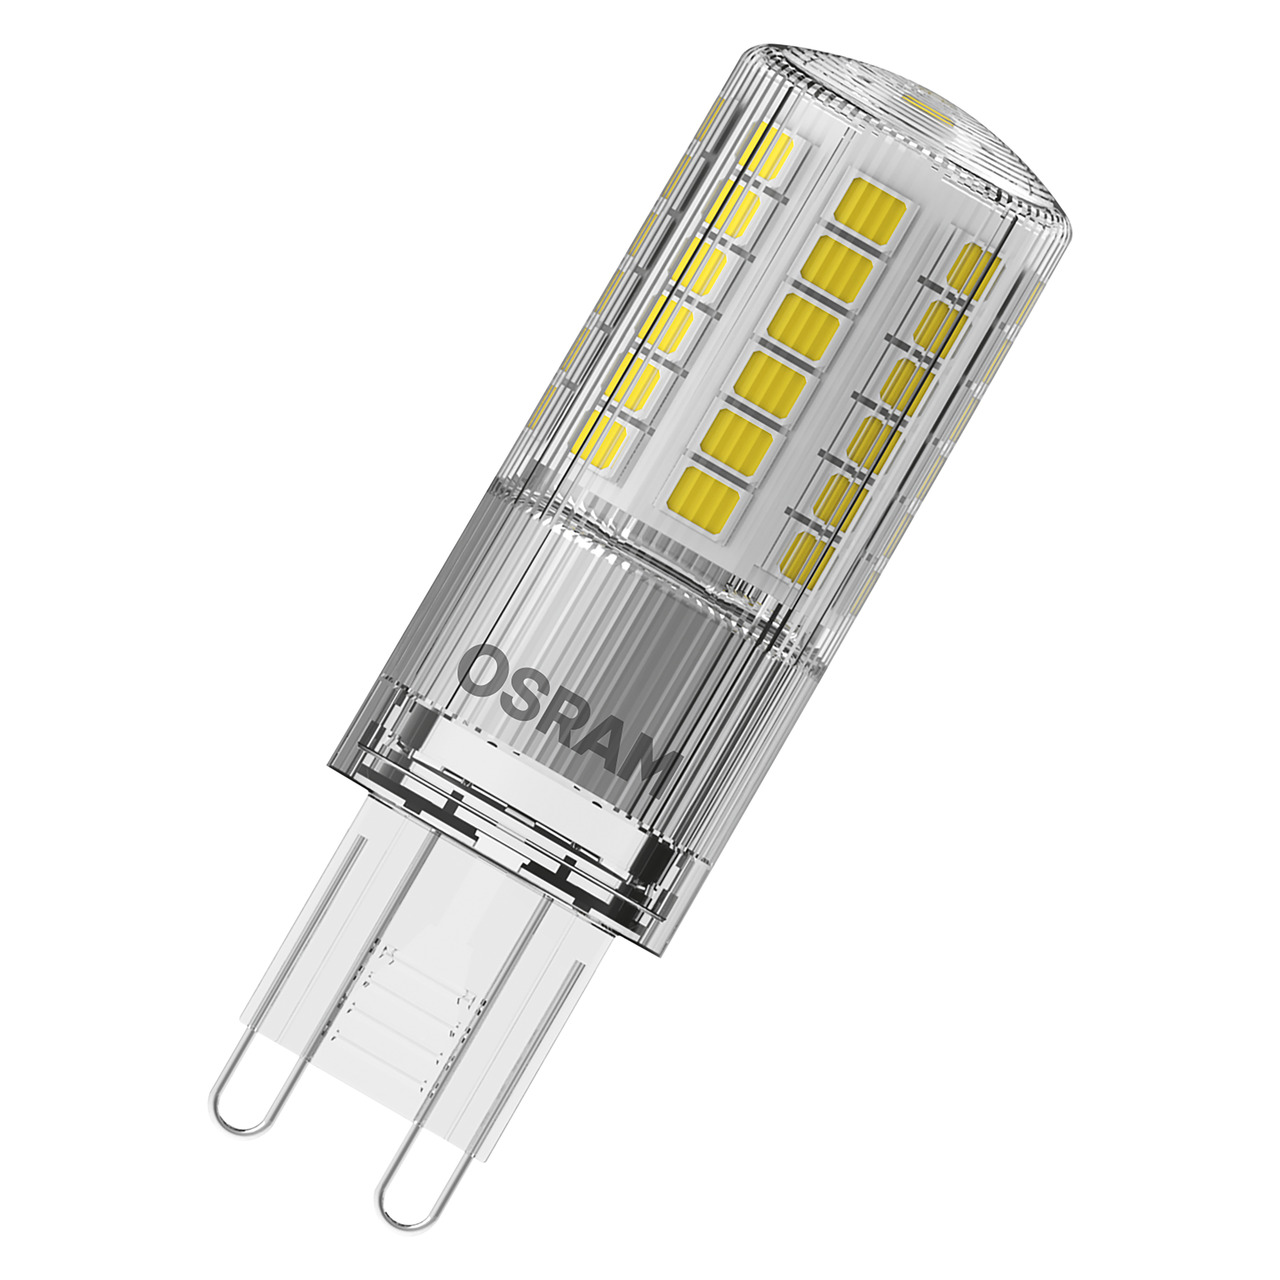 OSRAM 4-8-W-LED-Lampe T18- G9- 600 lm- warmweiss unter Beleuchtung